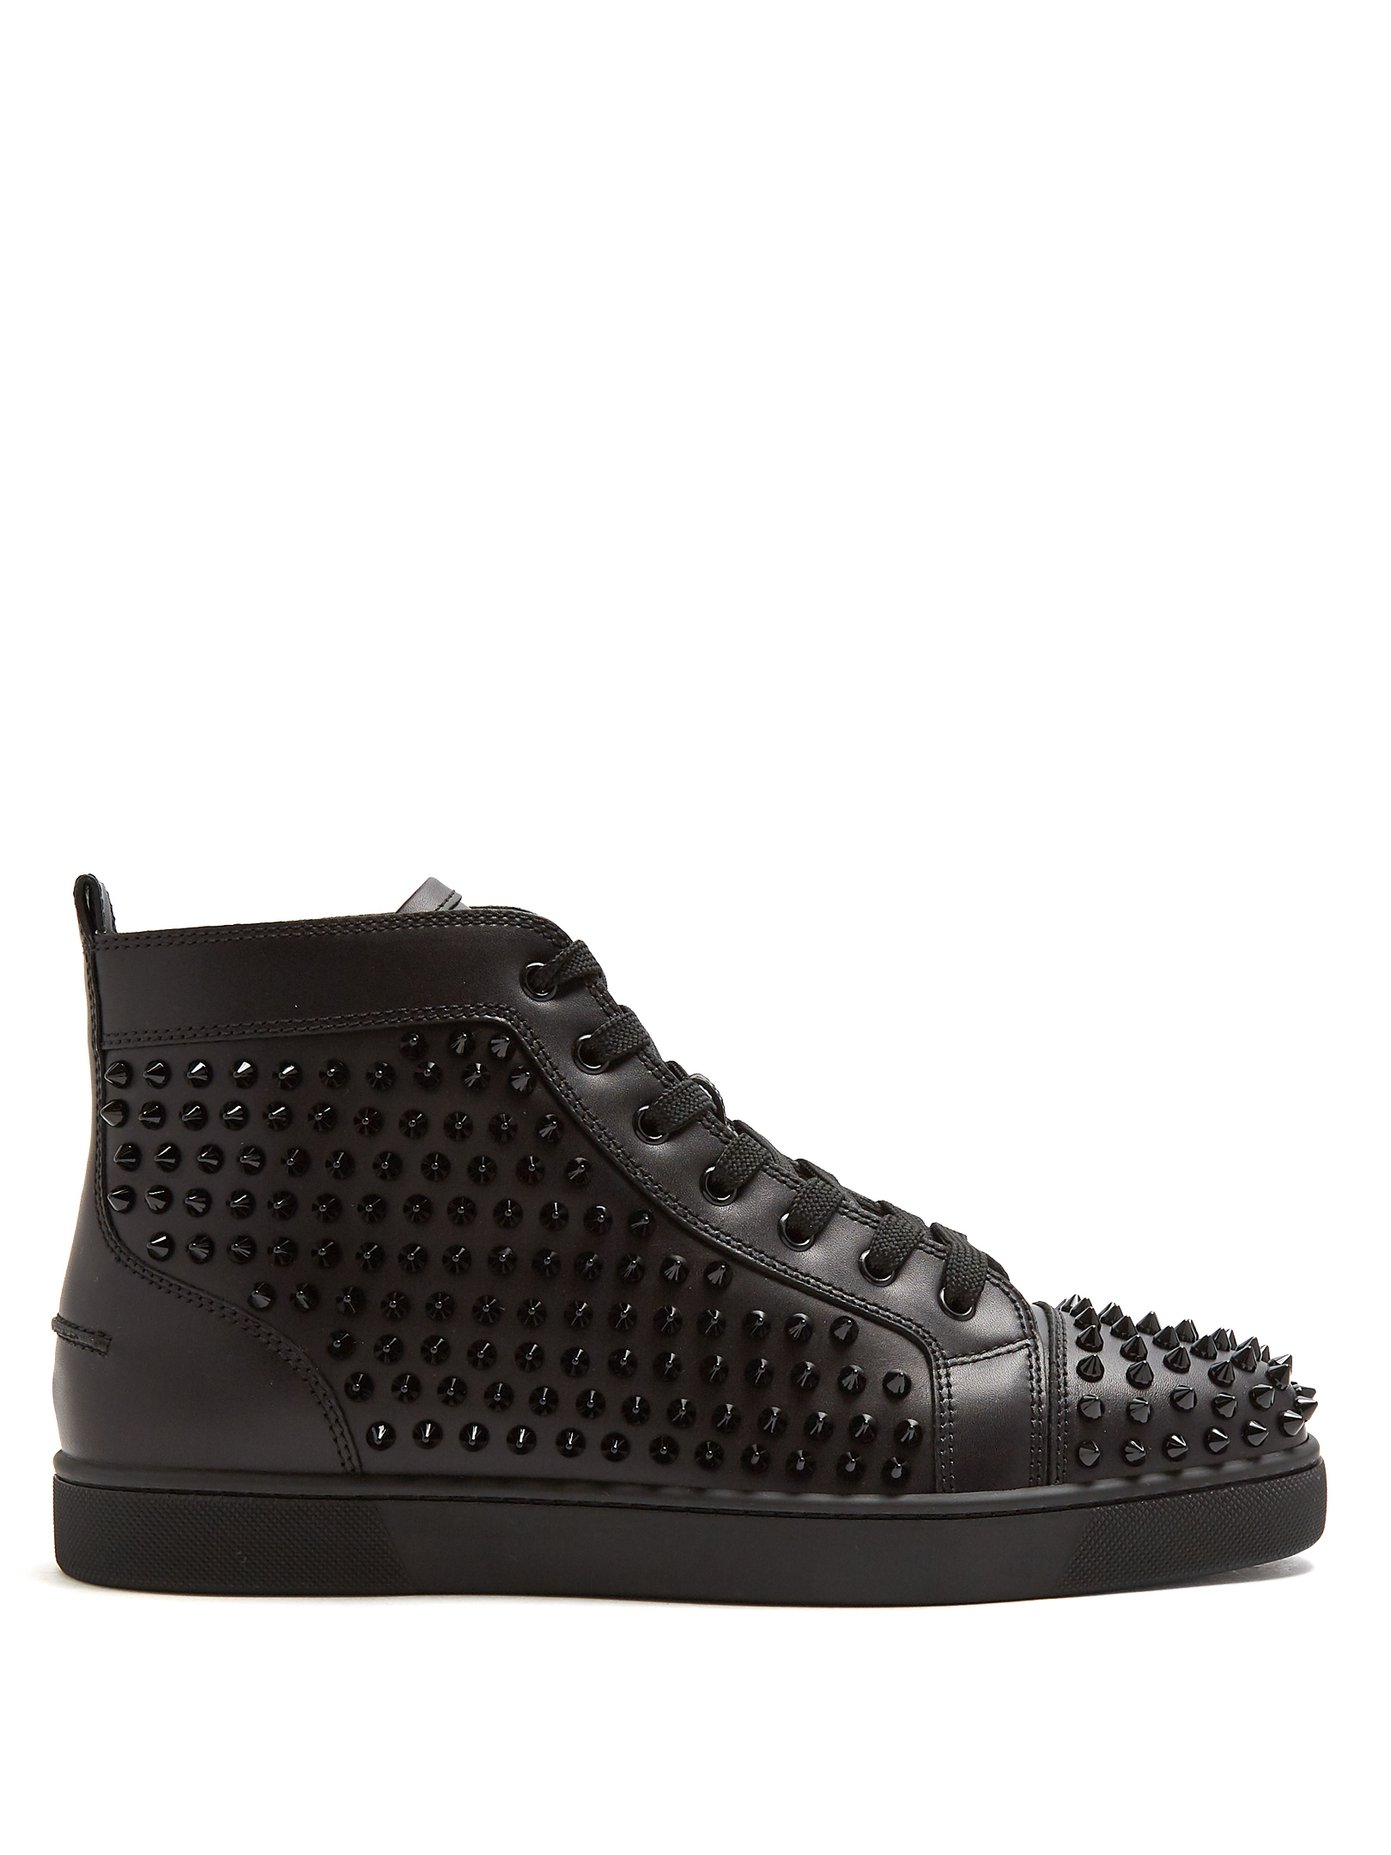 louboutin high top spikes